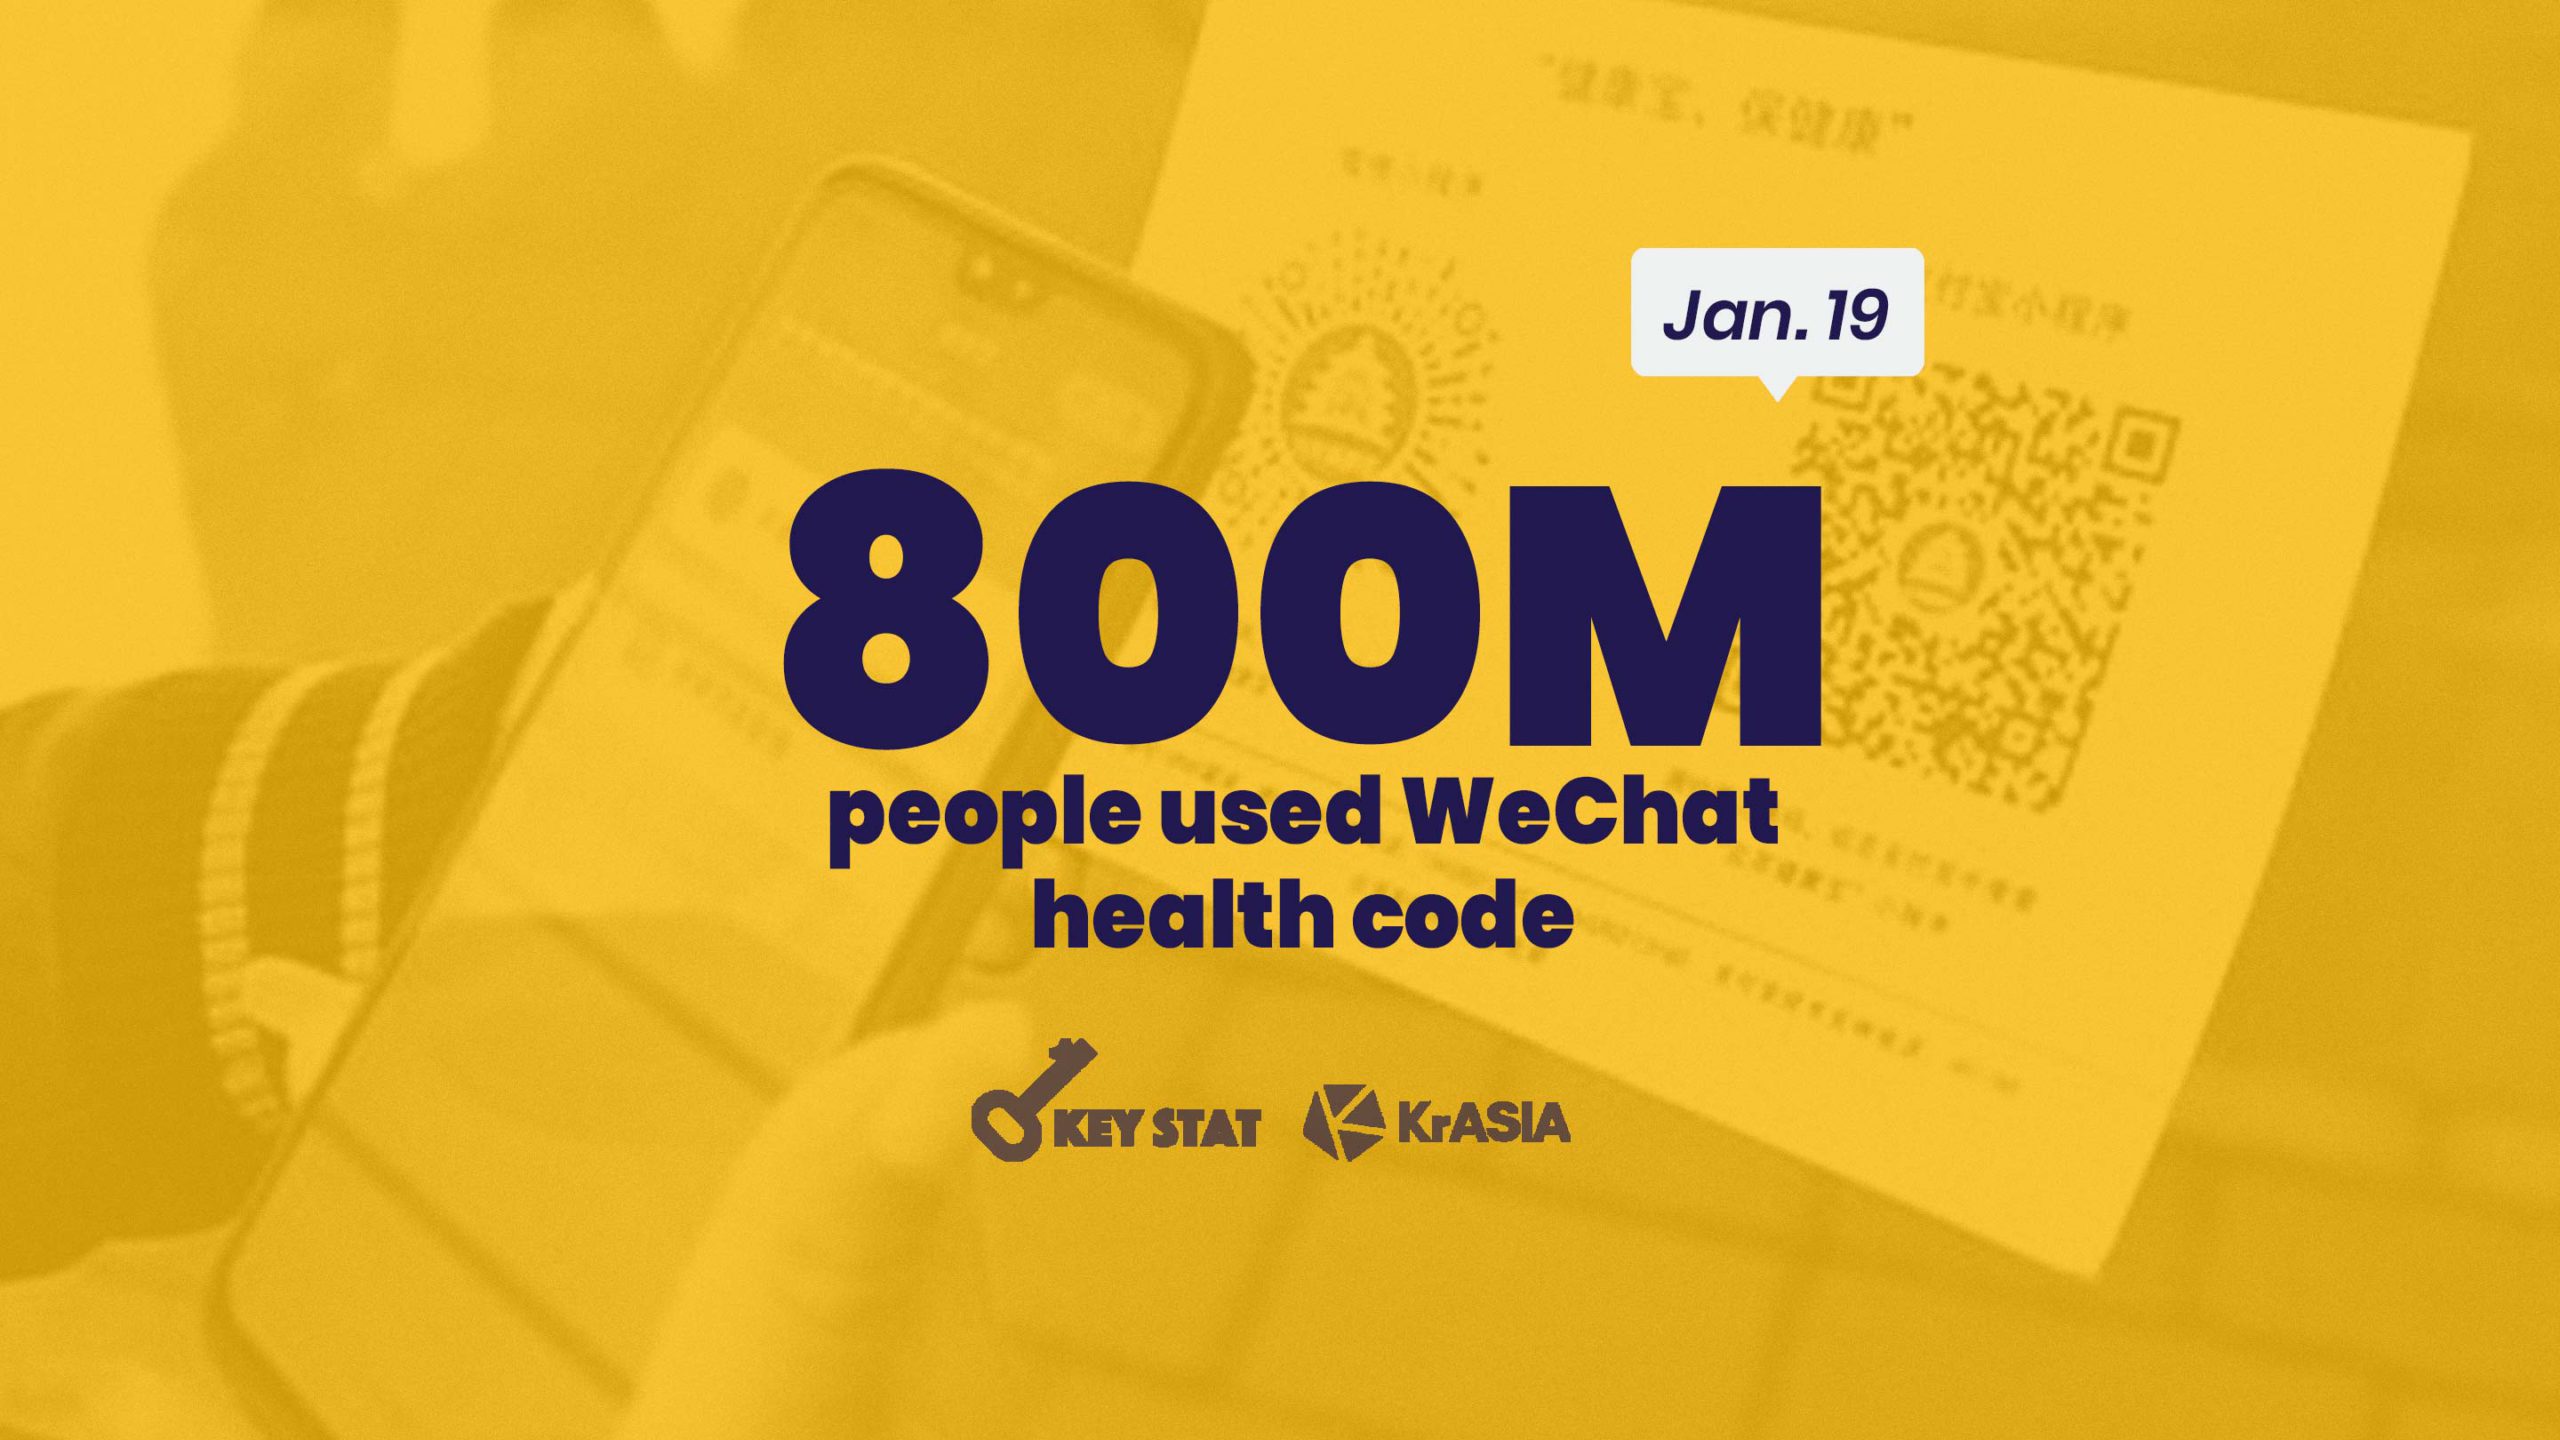 KEY STAT | WeChat health code served 800 million to track COVID-19